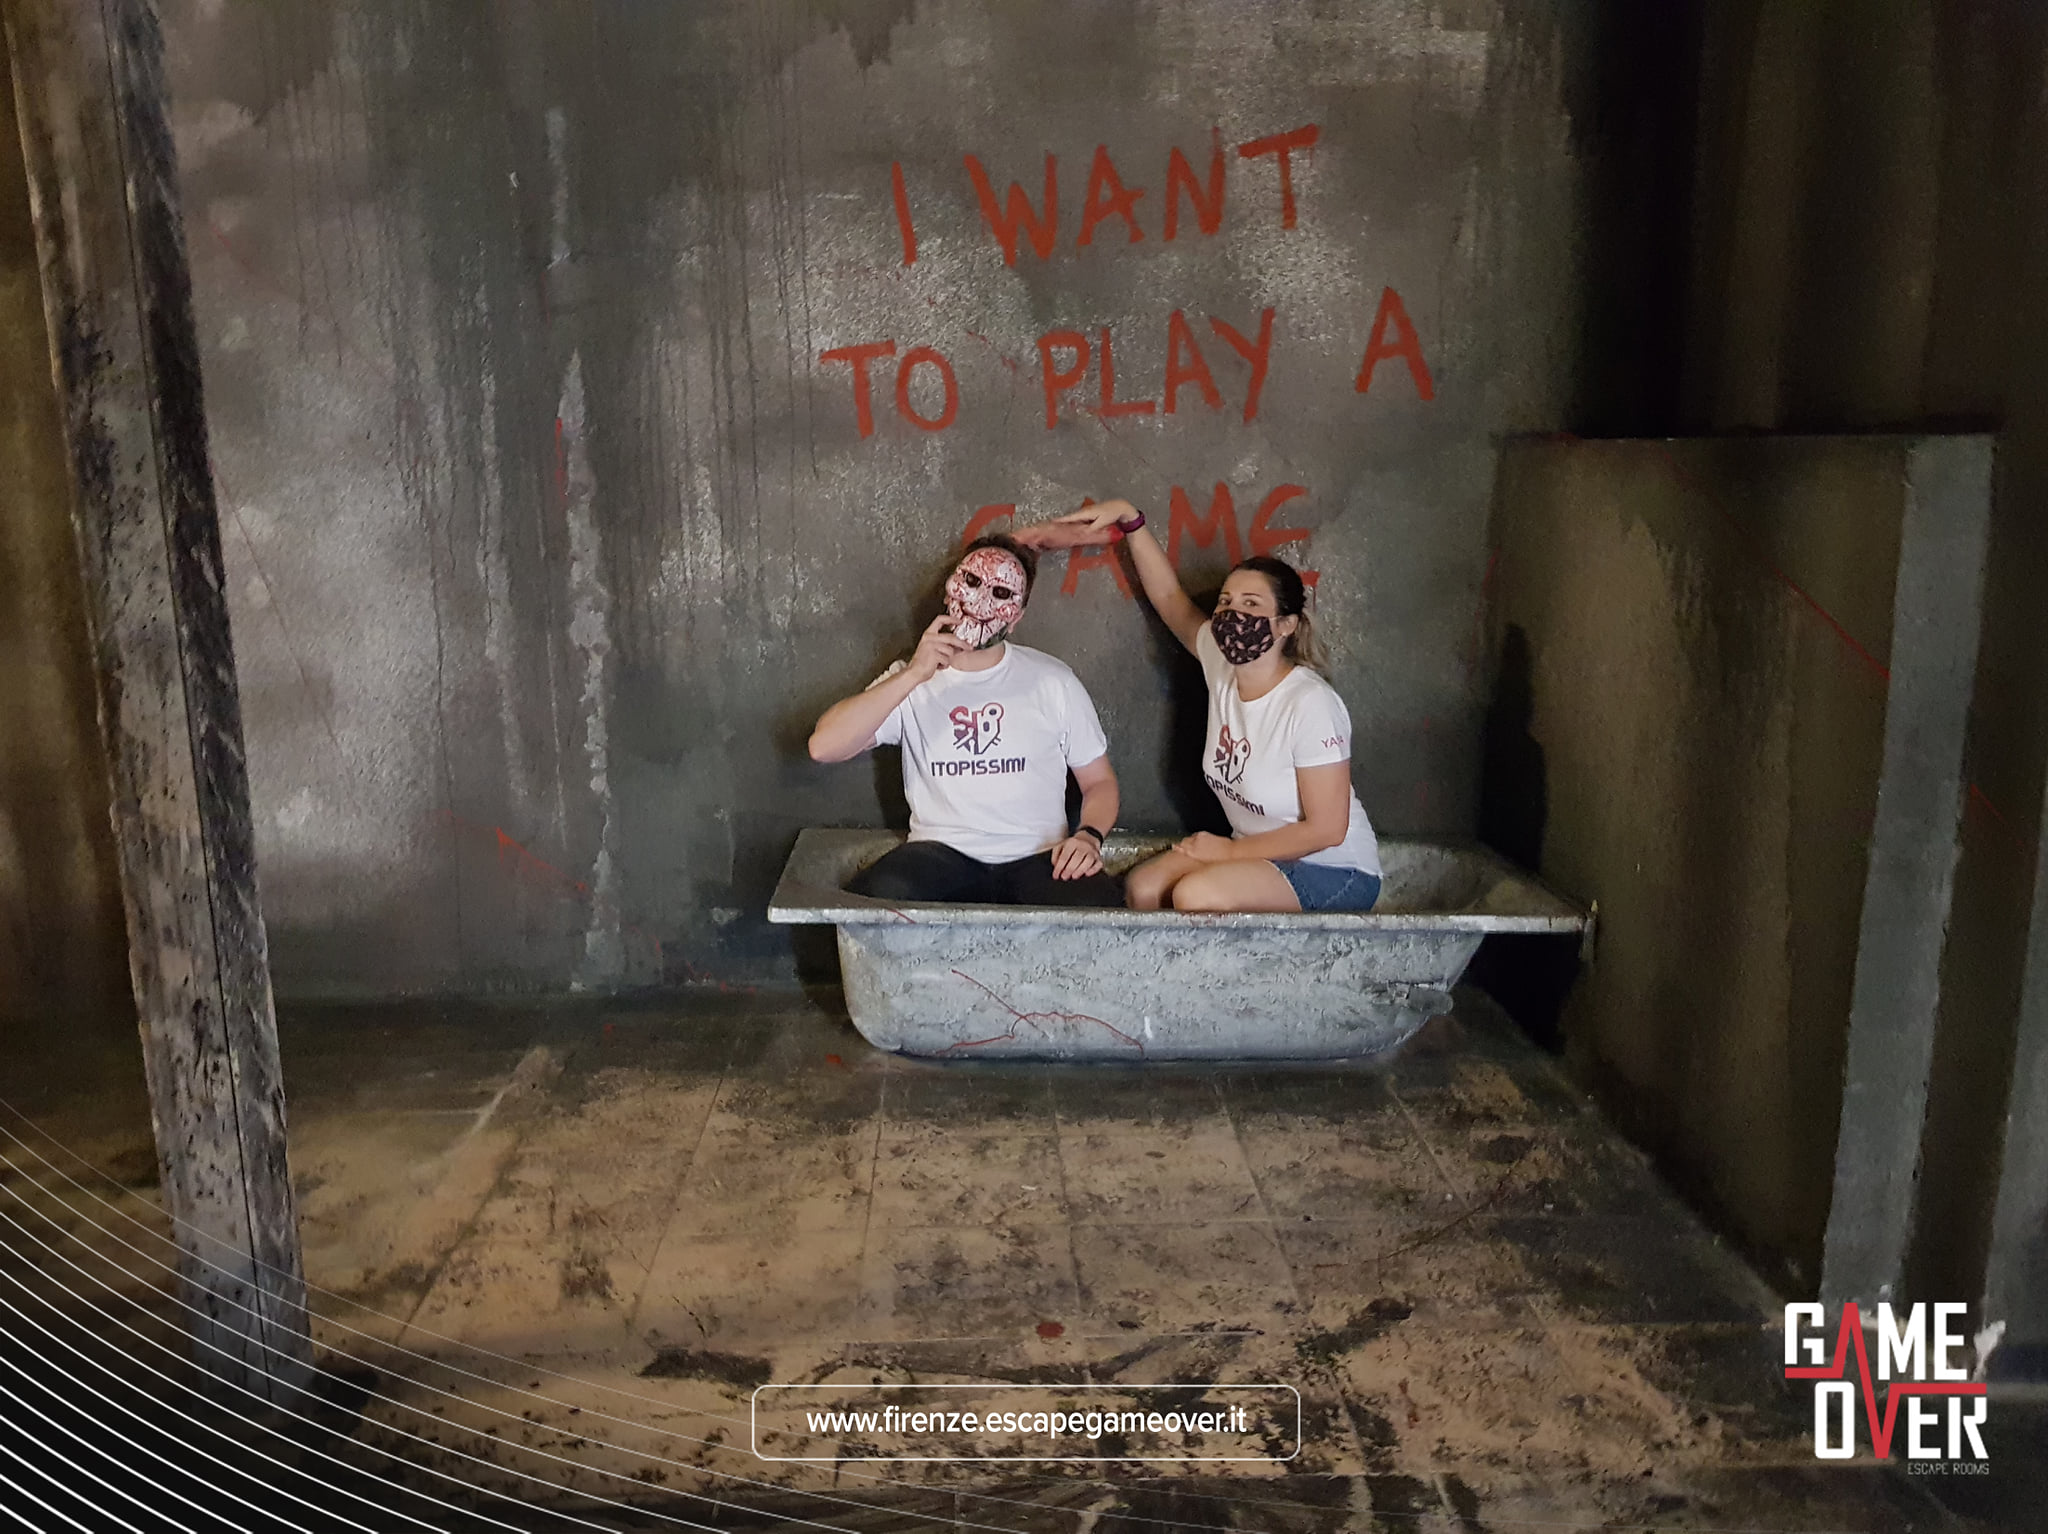 Saw GameOver escape rooms firenze